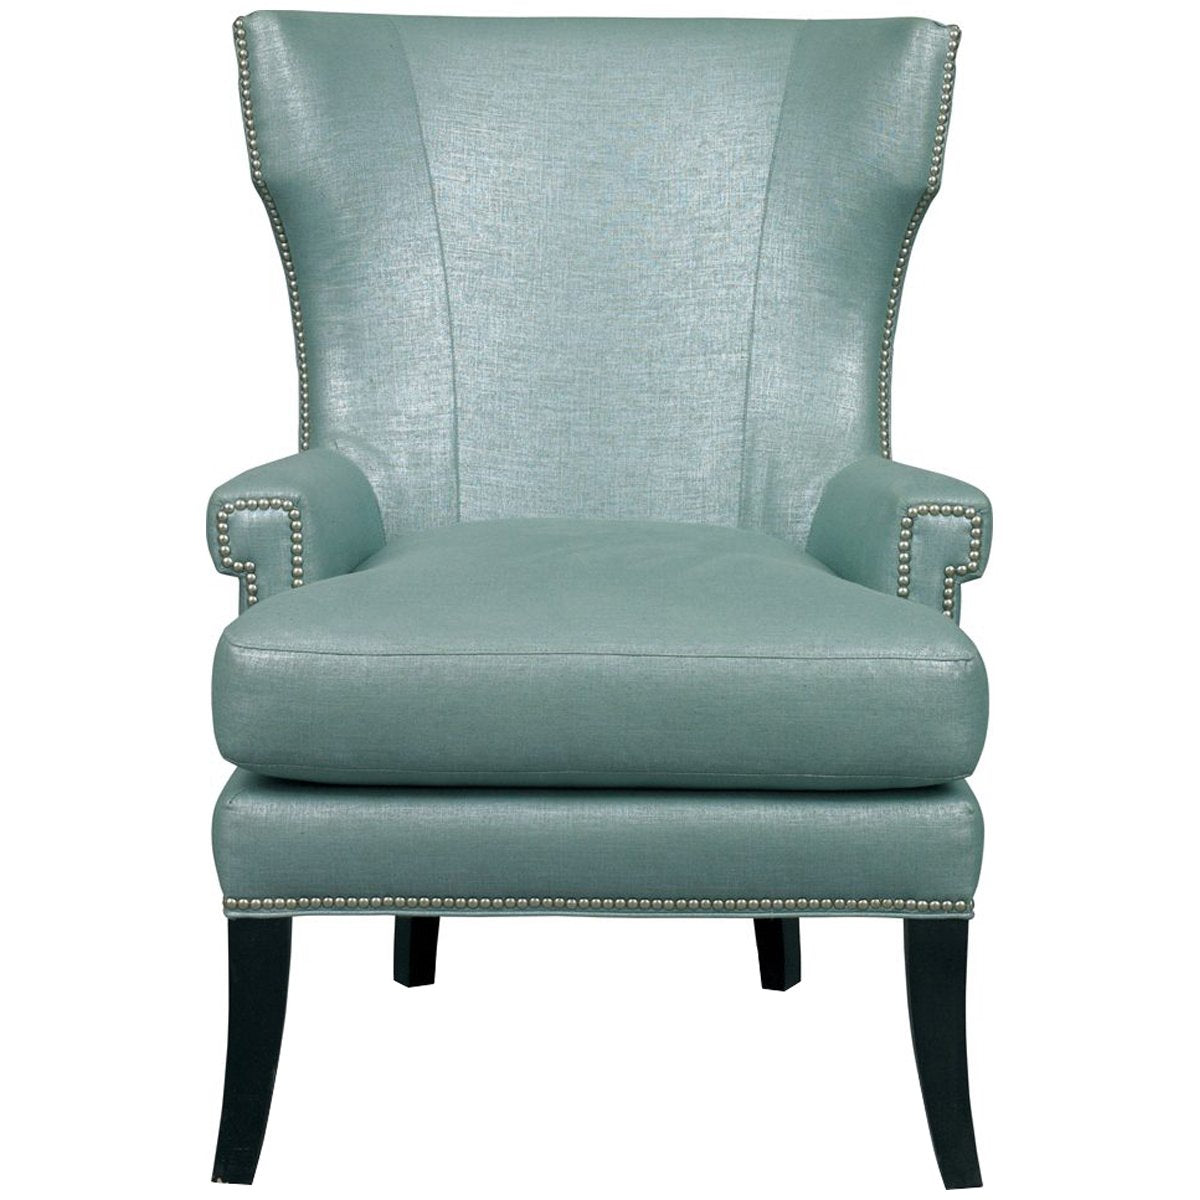 Hickory White Sable Wing Chair with Nail Trim